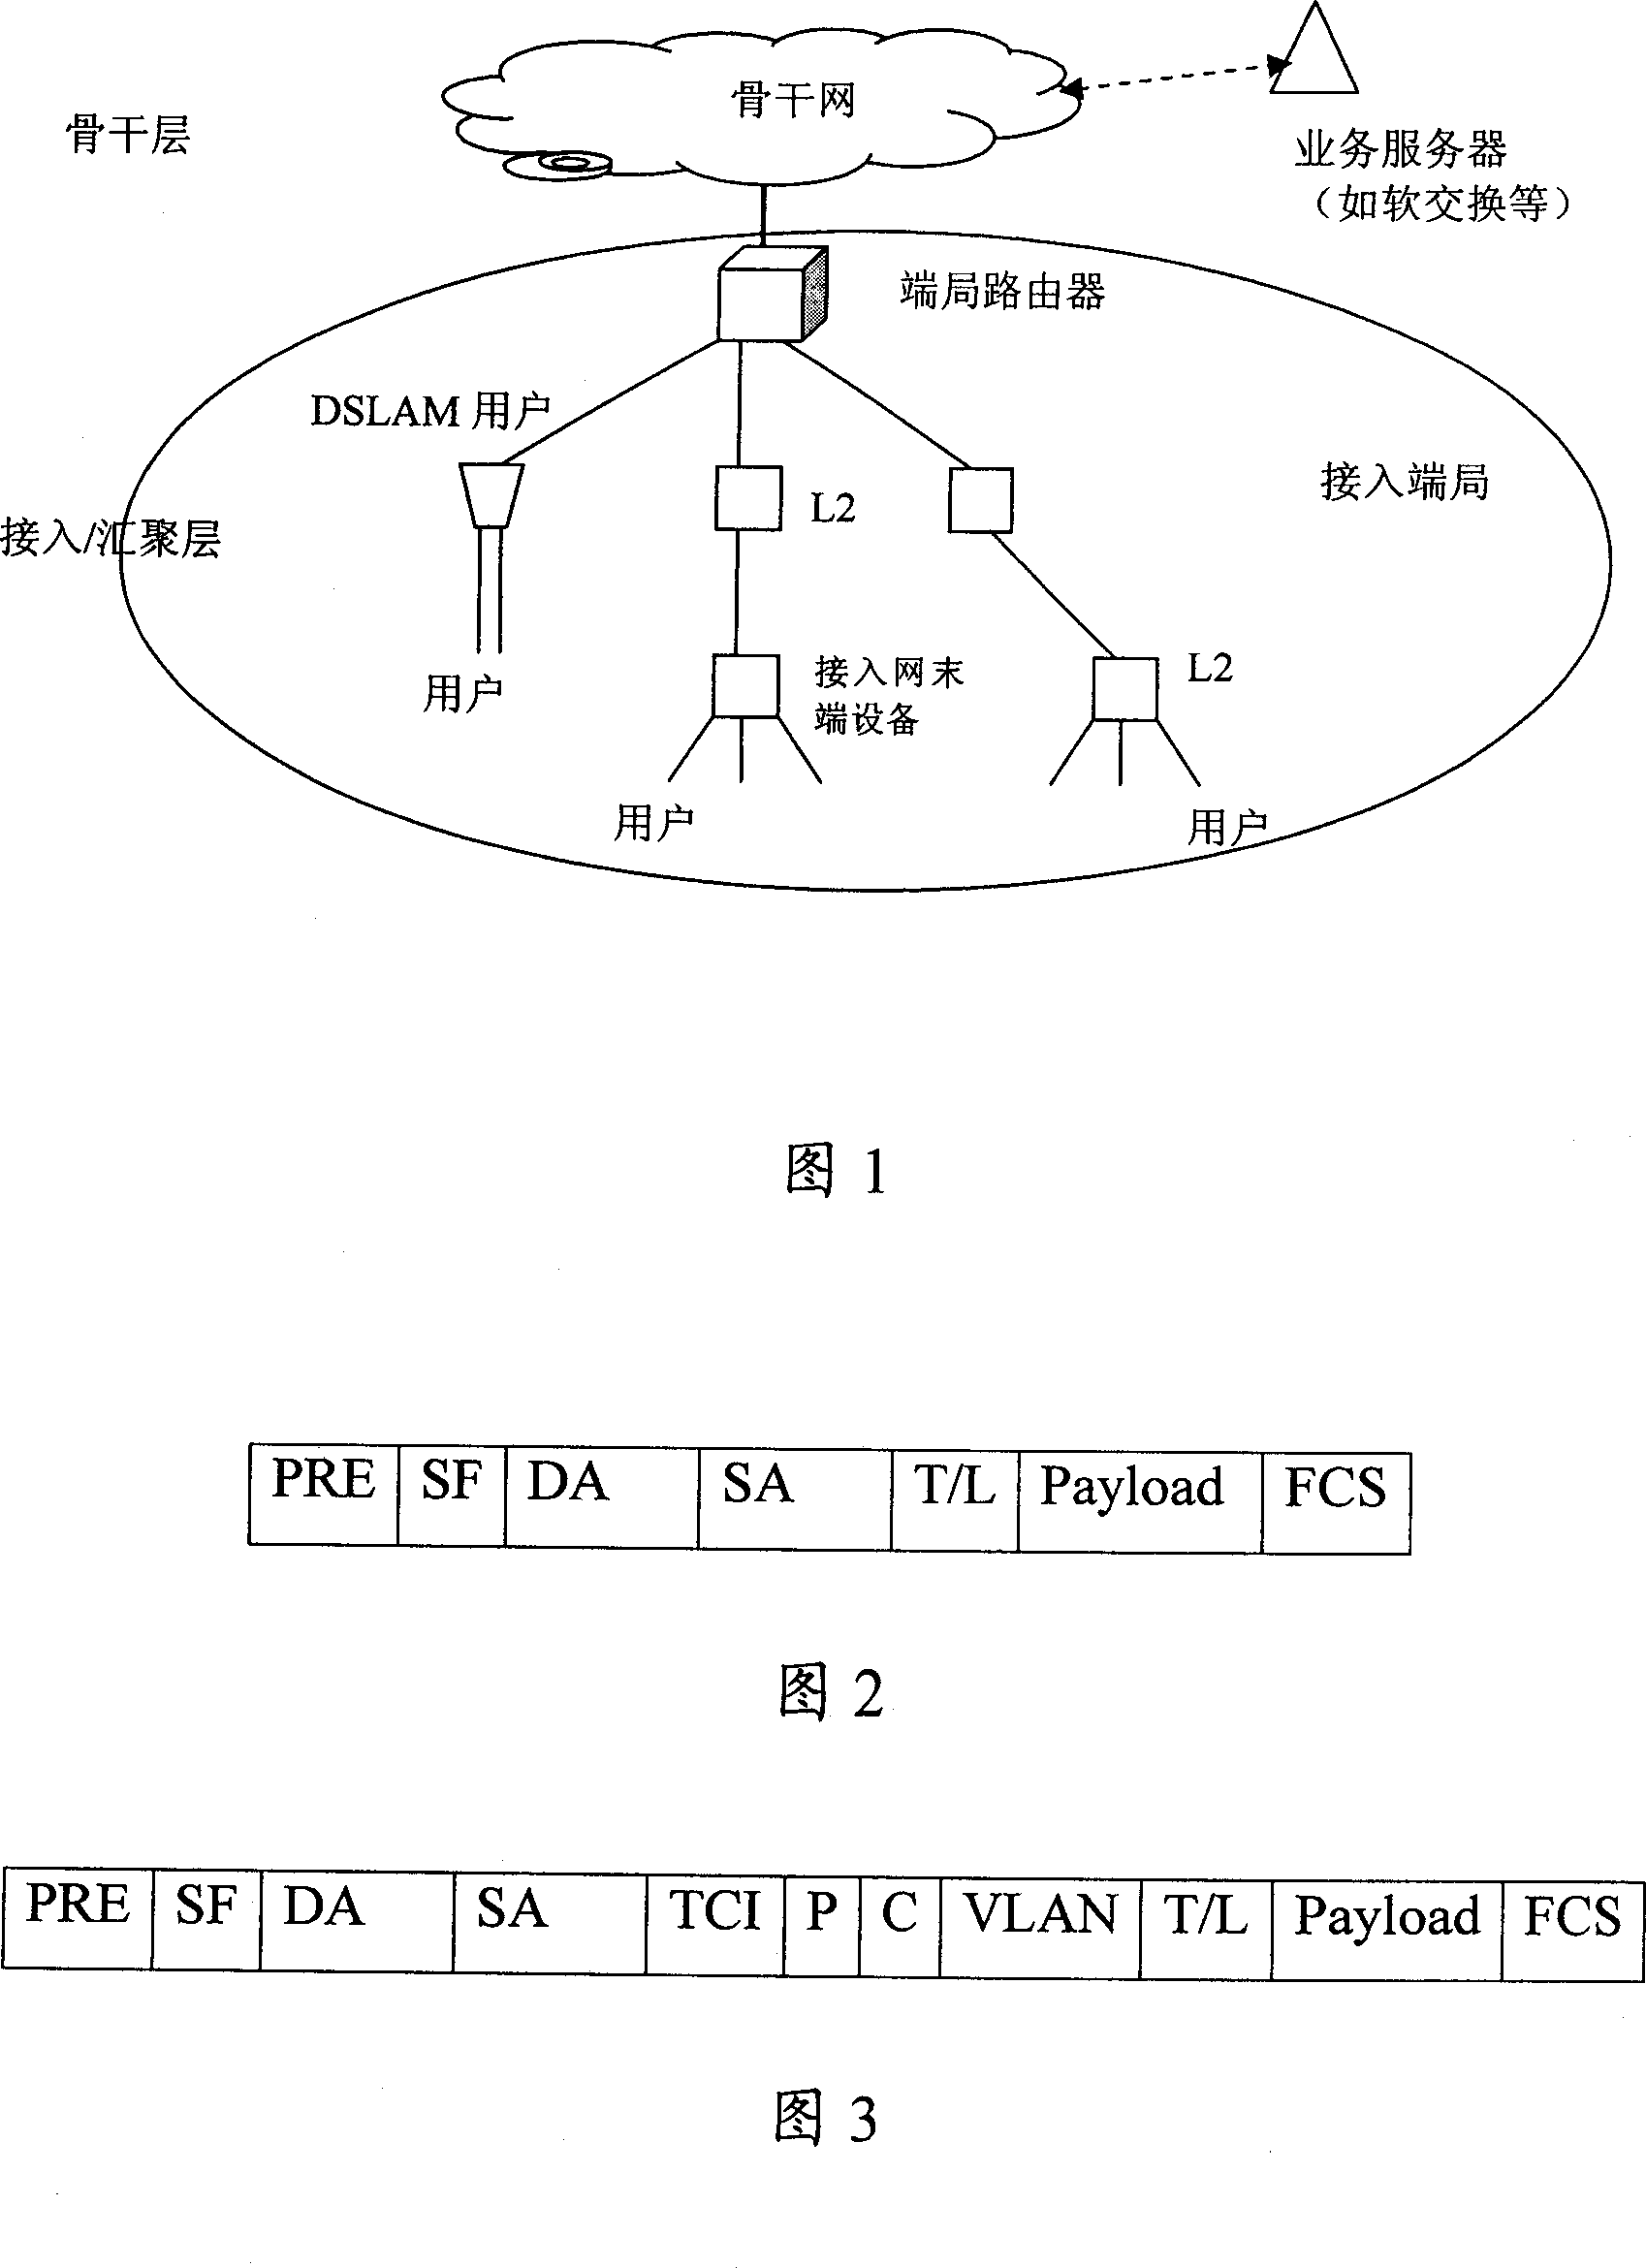 Method for ensuring QoS of IP access network service